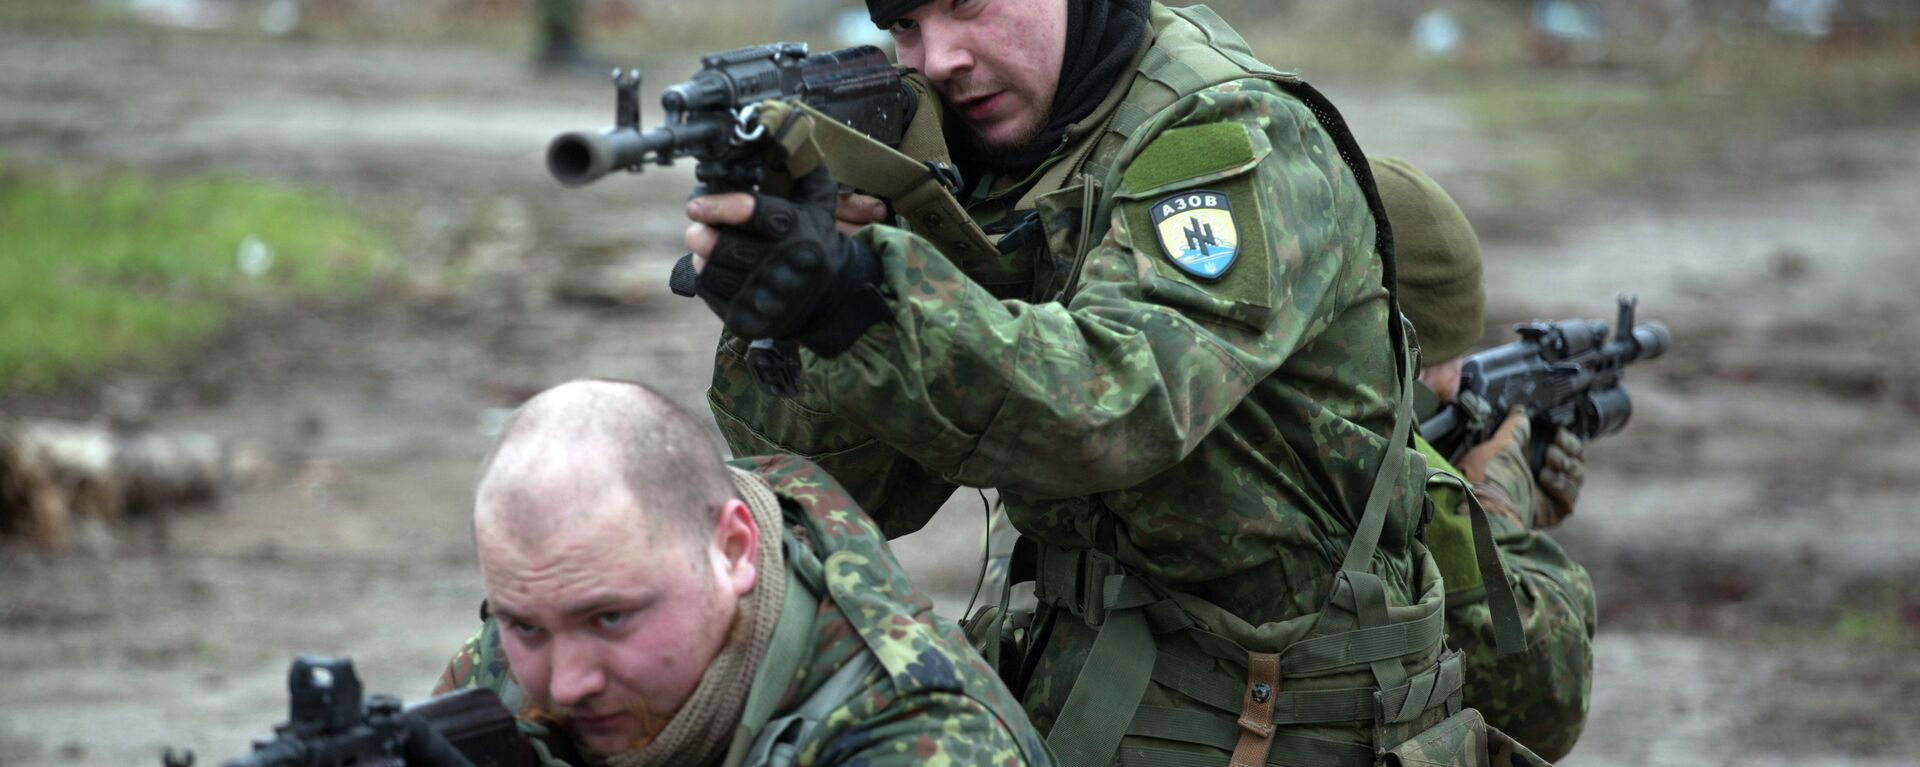 Fighters of the Azov paramilitary battalion, a pro-Ukrainian volunteer armed group, take part in combat drills near the southern Ukrainian city of Mariupol on February 6, 2015 - Sputnik International, 1920, 06.04.2022